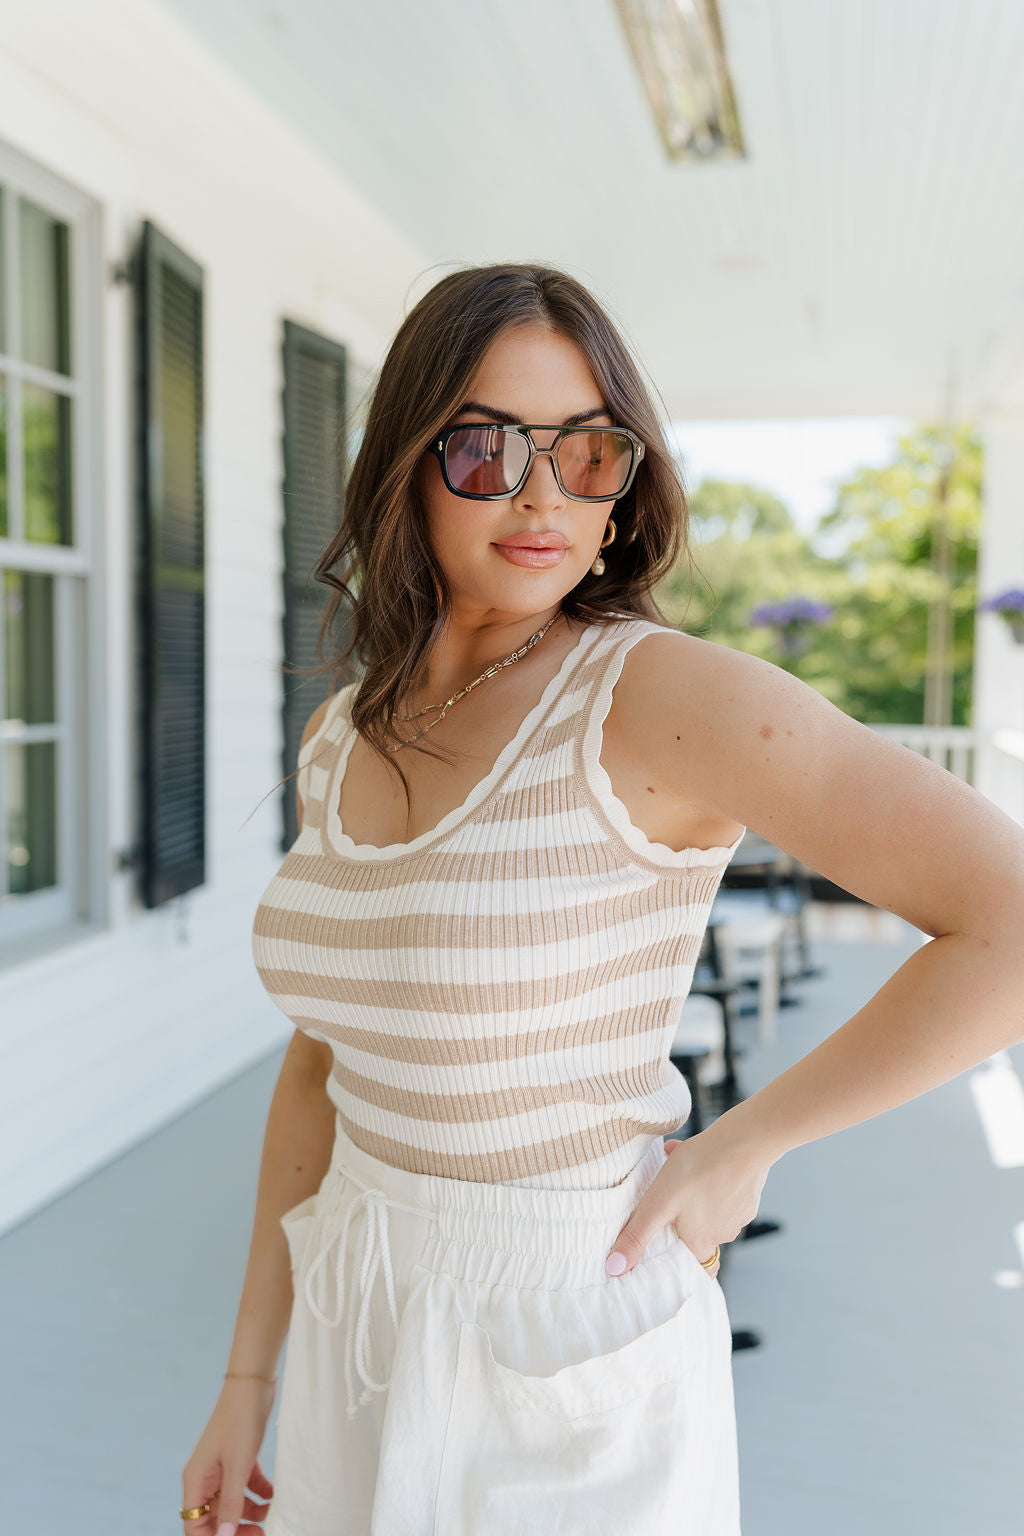 Upper body side view of brunette female model wearing the Nora Striped Tank Top in Taupe that has horizontal taupe and off white stripes, a scoop neck, scallop trim, and ribbed fabric. Top is shown tucked into shorts.